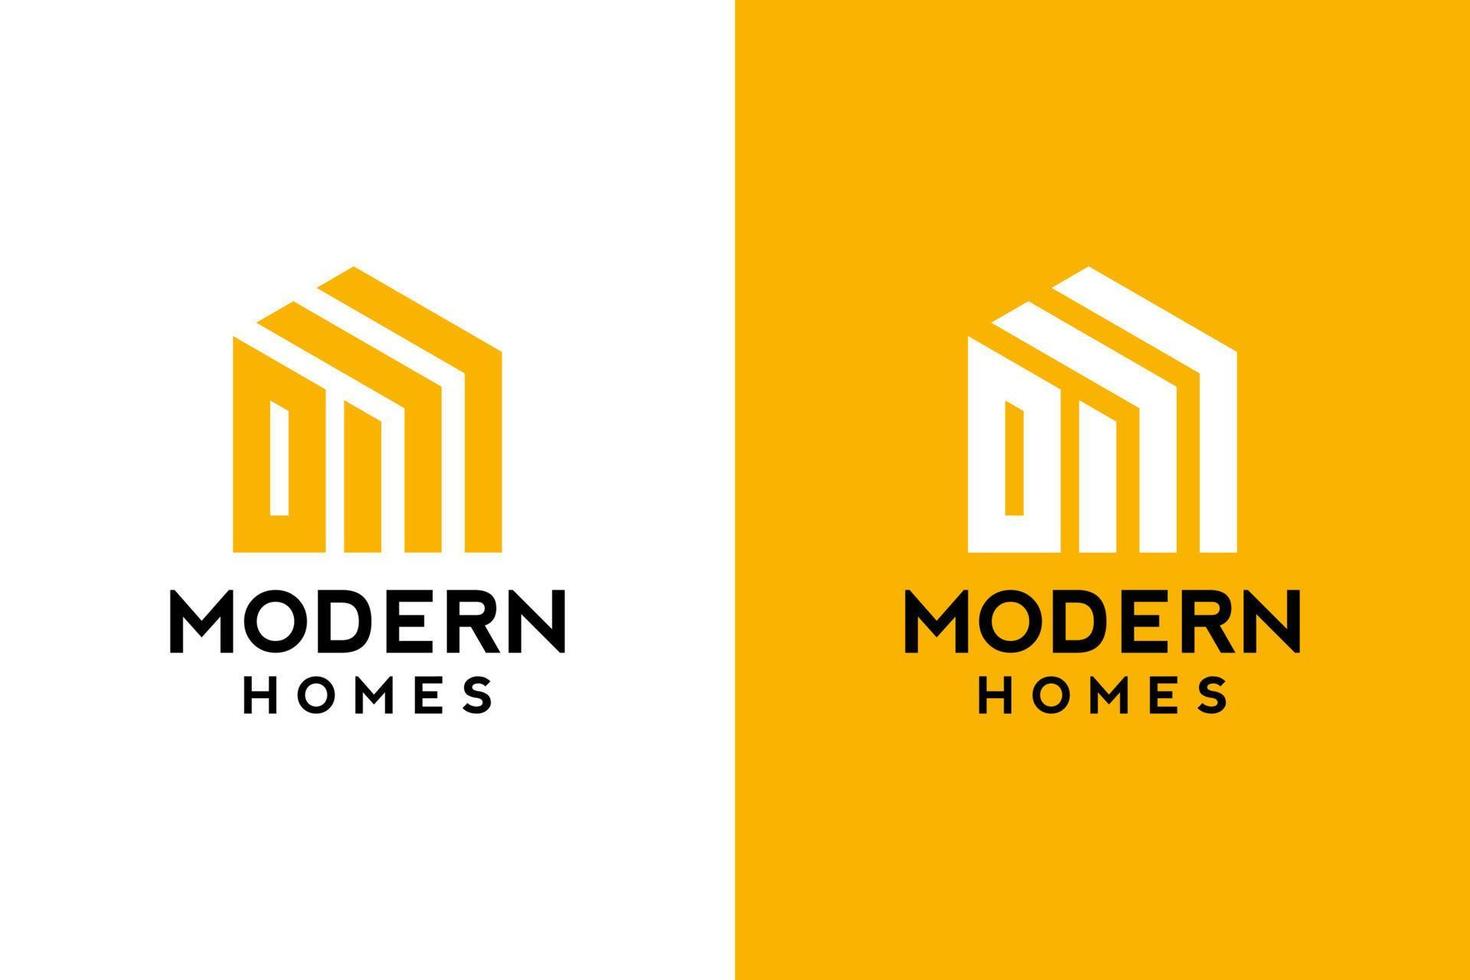 Logo design of I in vector for construction, home, real estate, building, property. Minimal awesome trendy professional logo design template on double background.